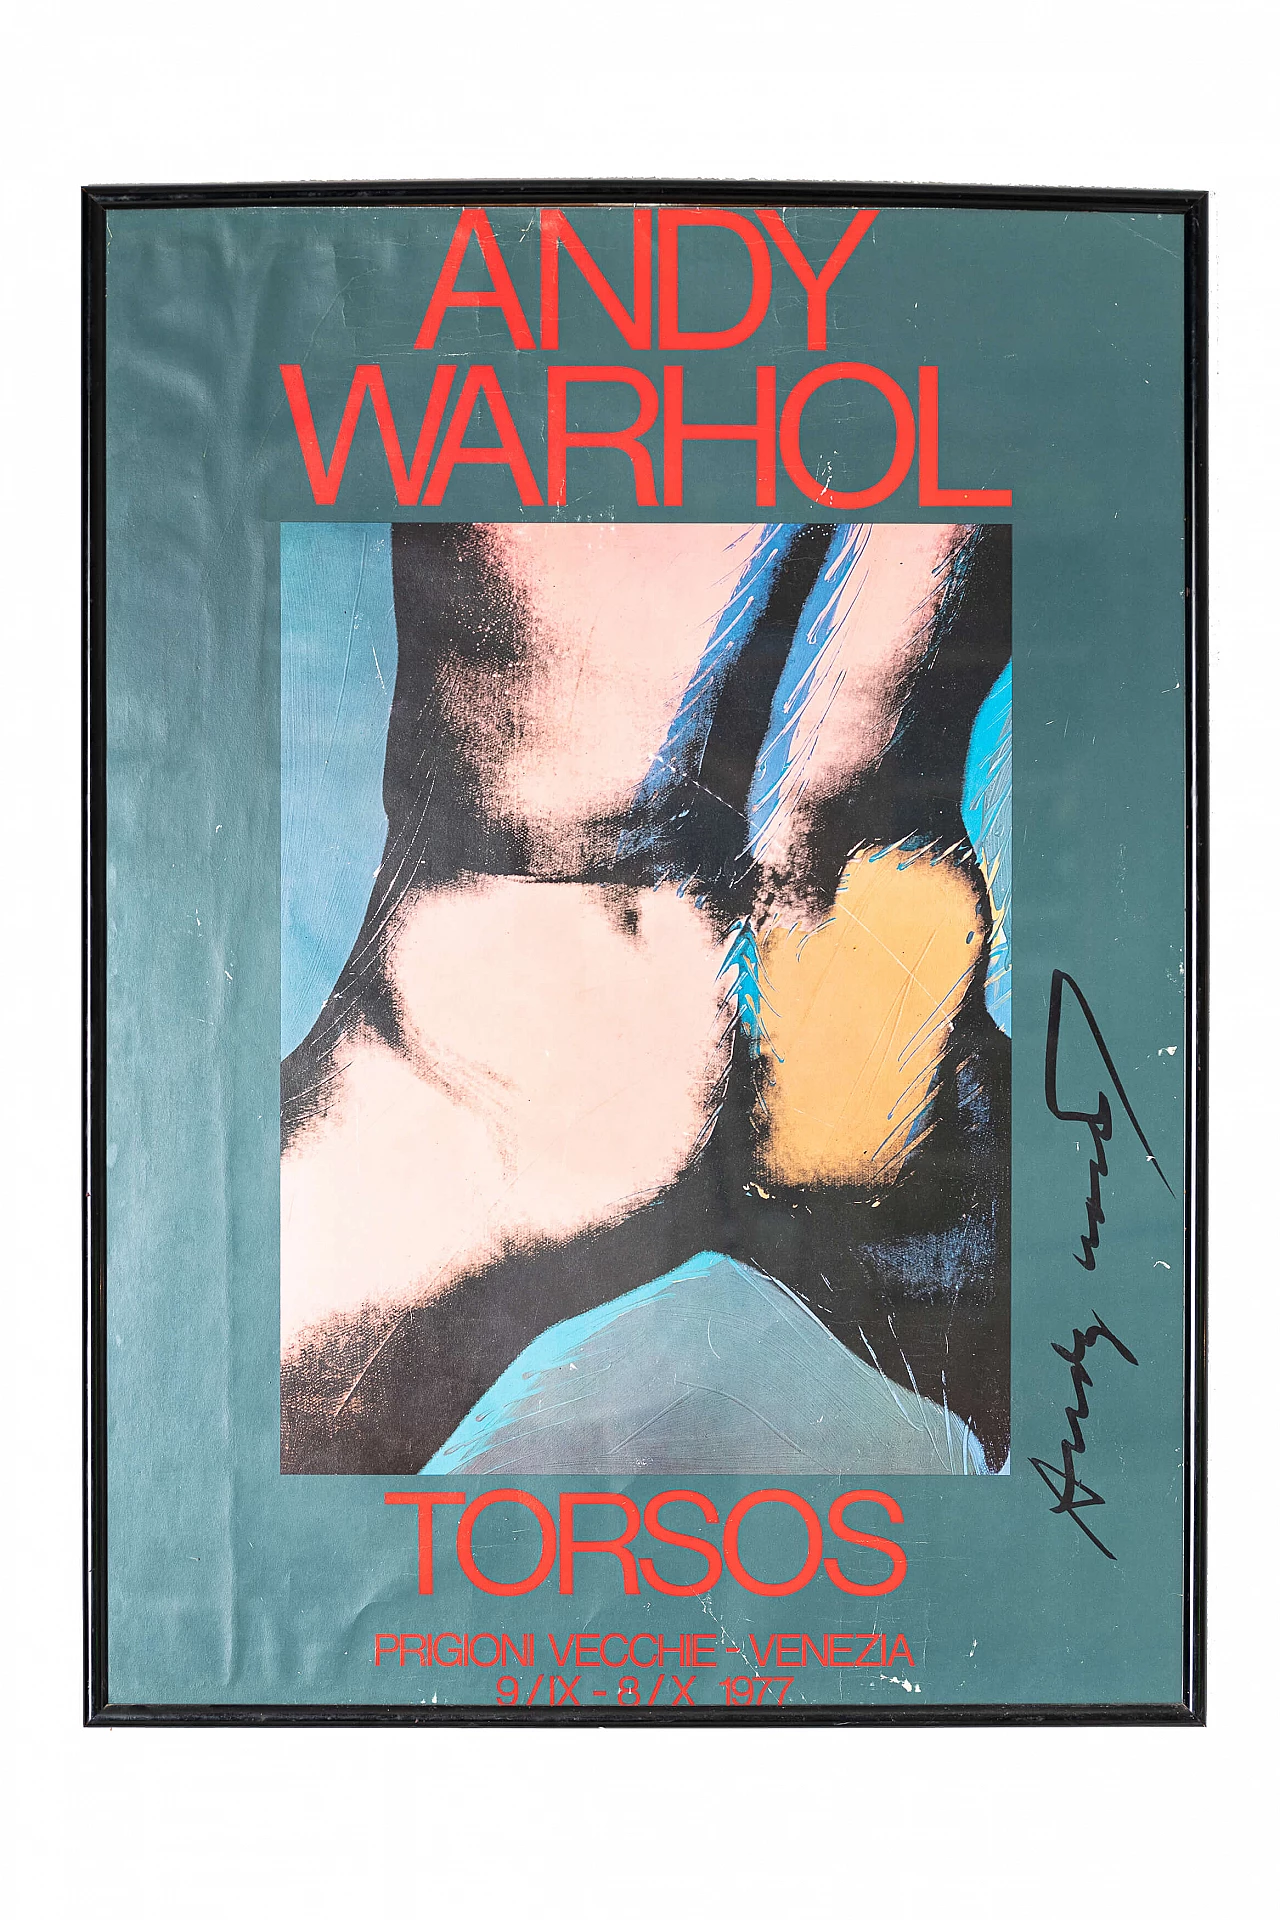 Torsos exhibition poster by Andy Warhol, signed, 1977 1304443